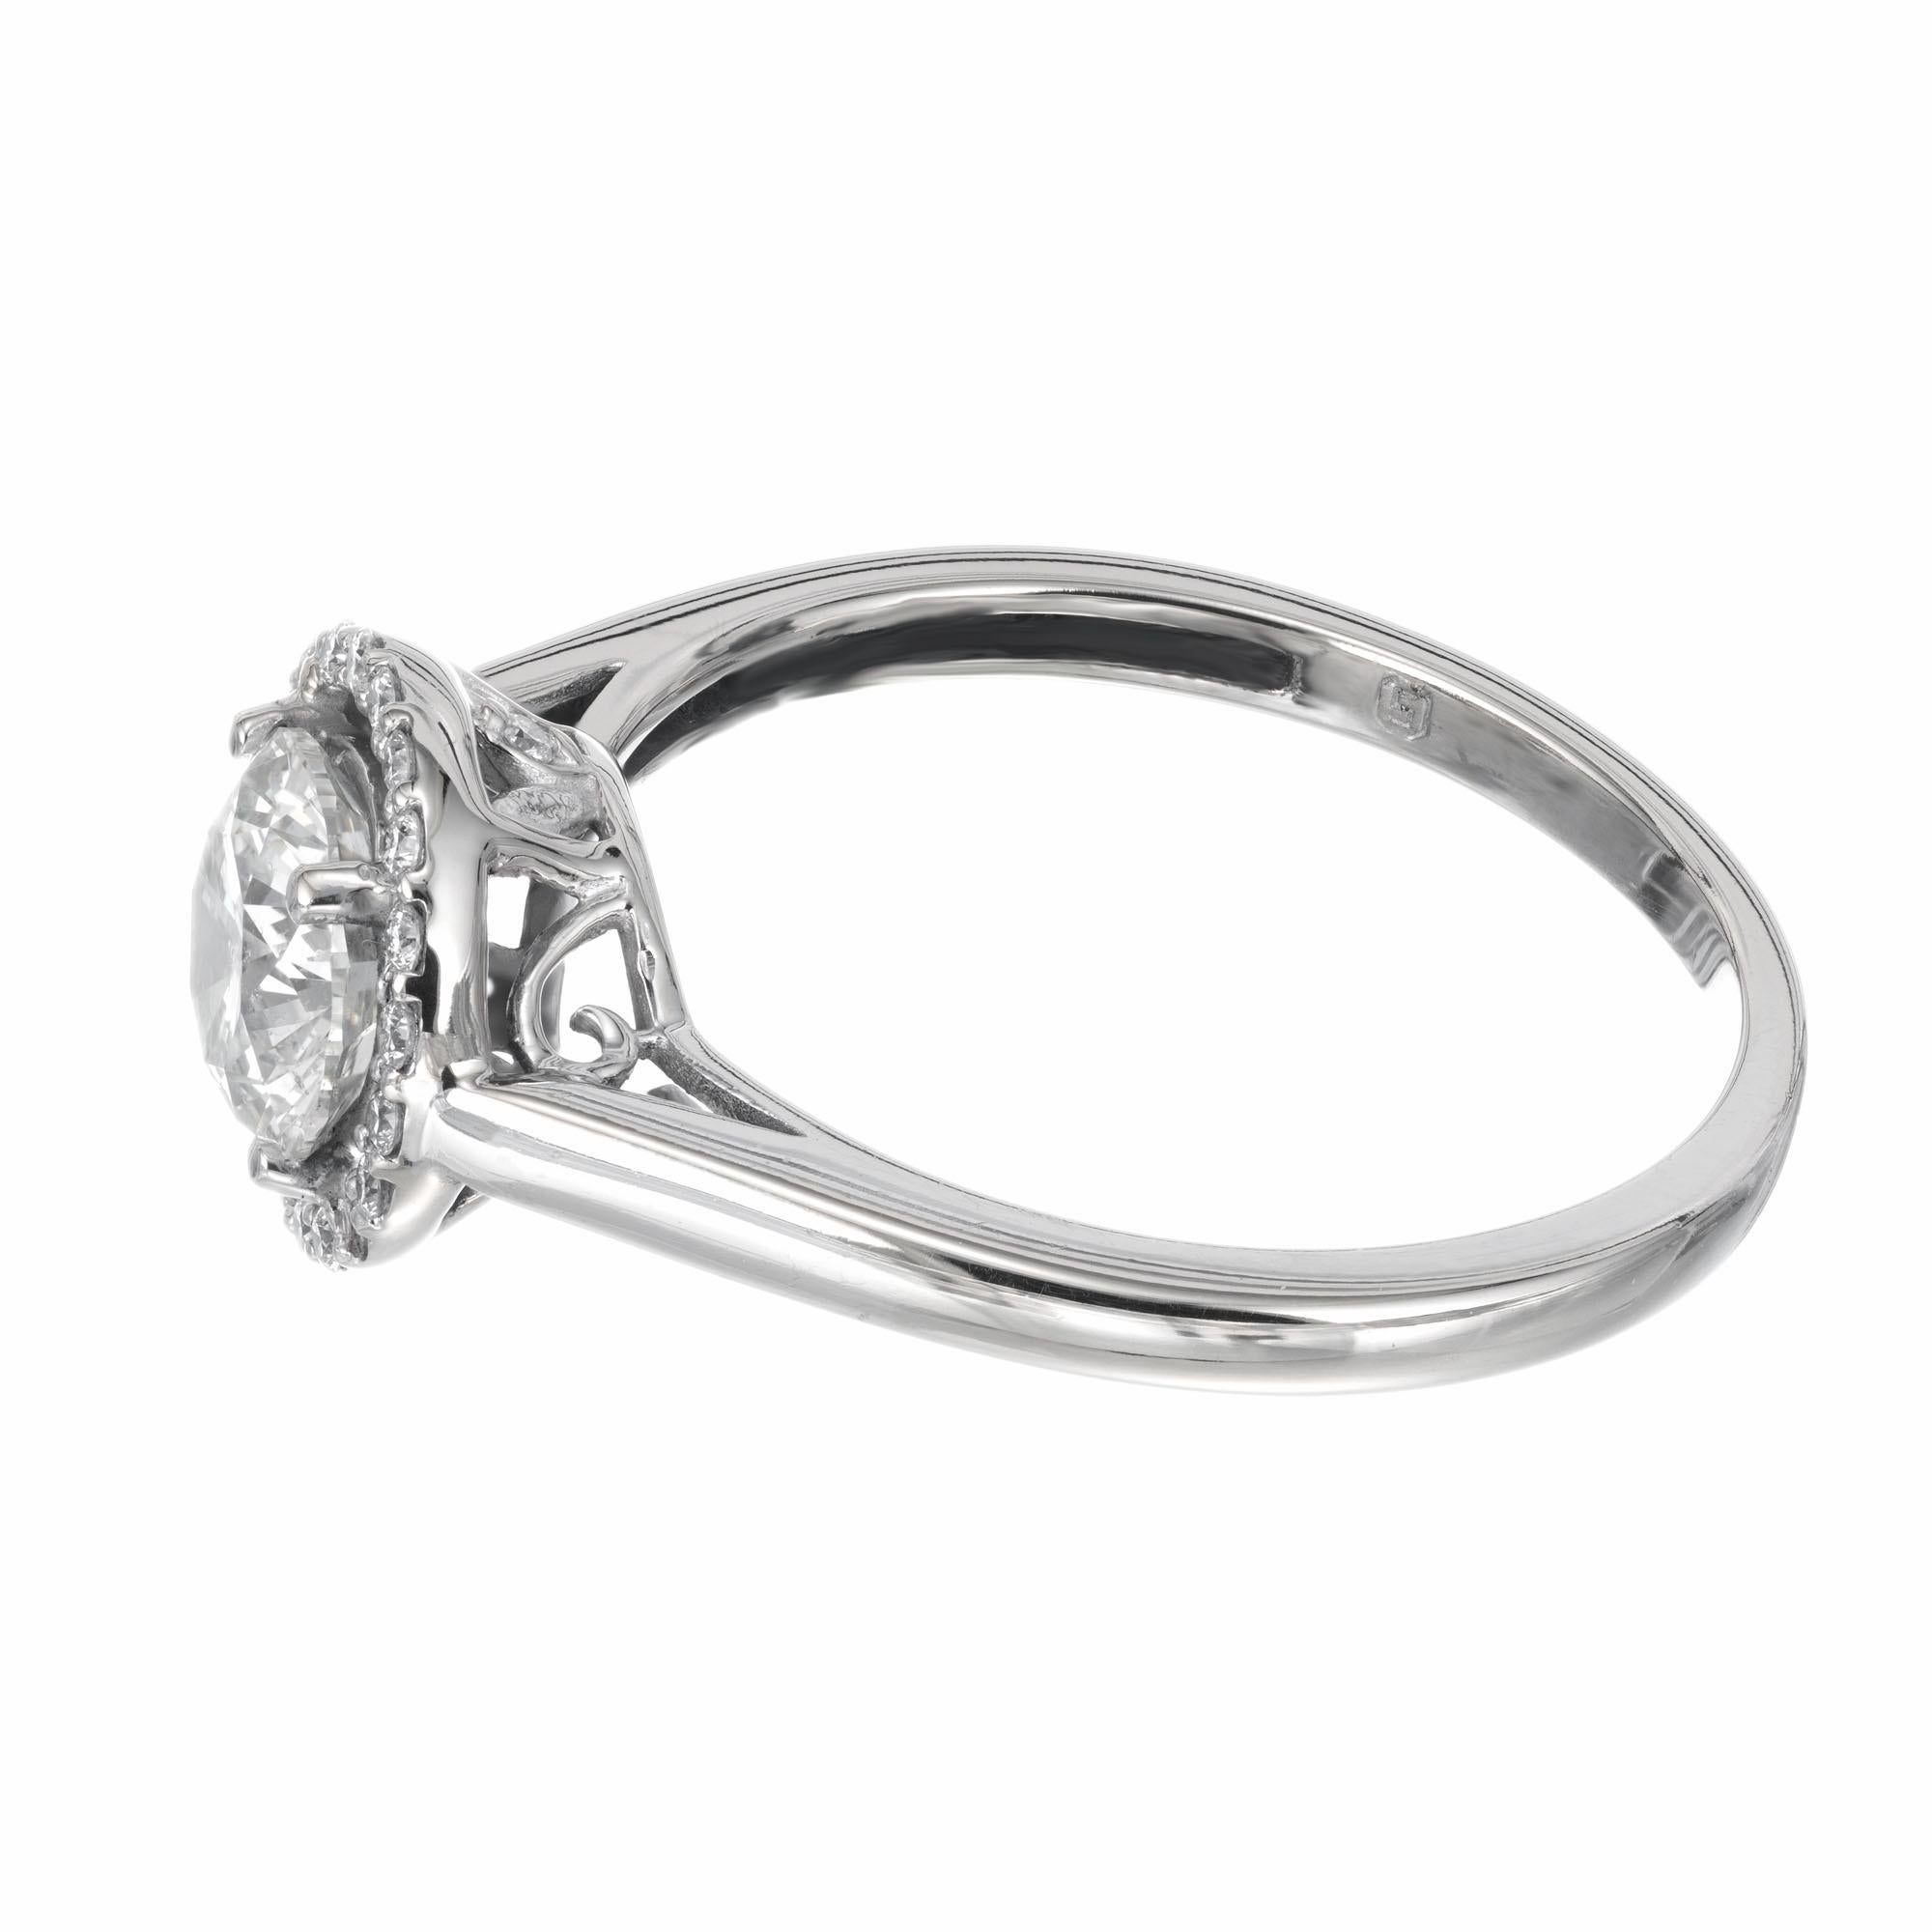 Round Cut 1.00 Carat Round Diamond Halo White Gold Engagement Ring For Sale